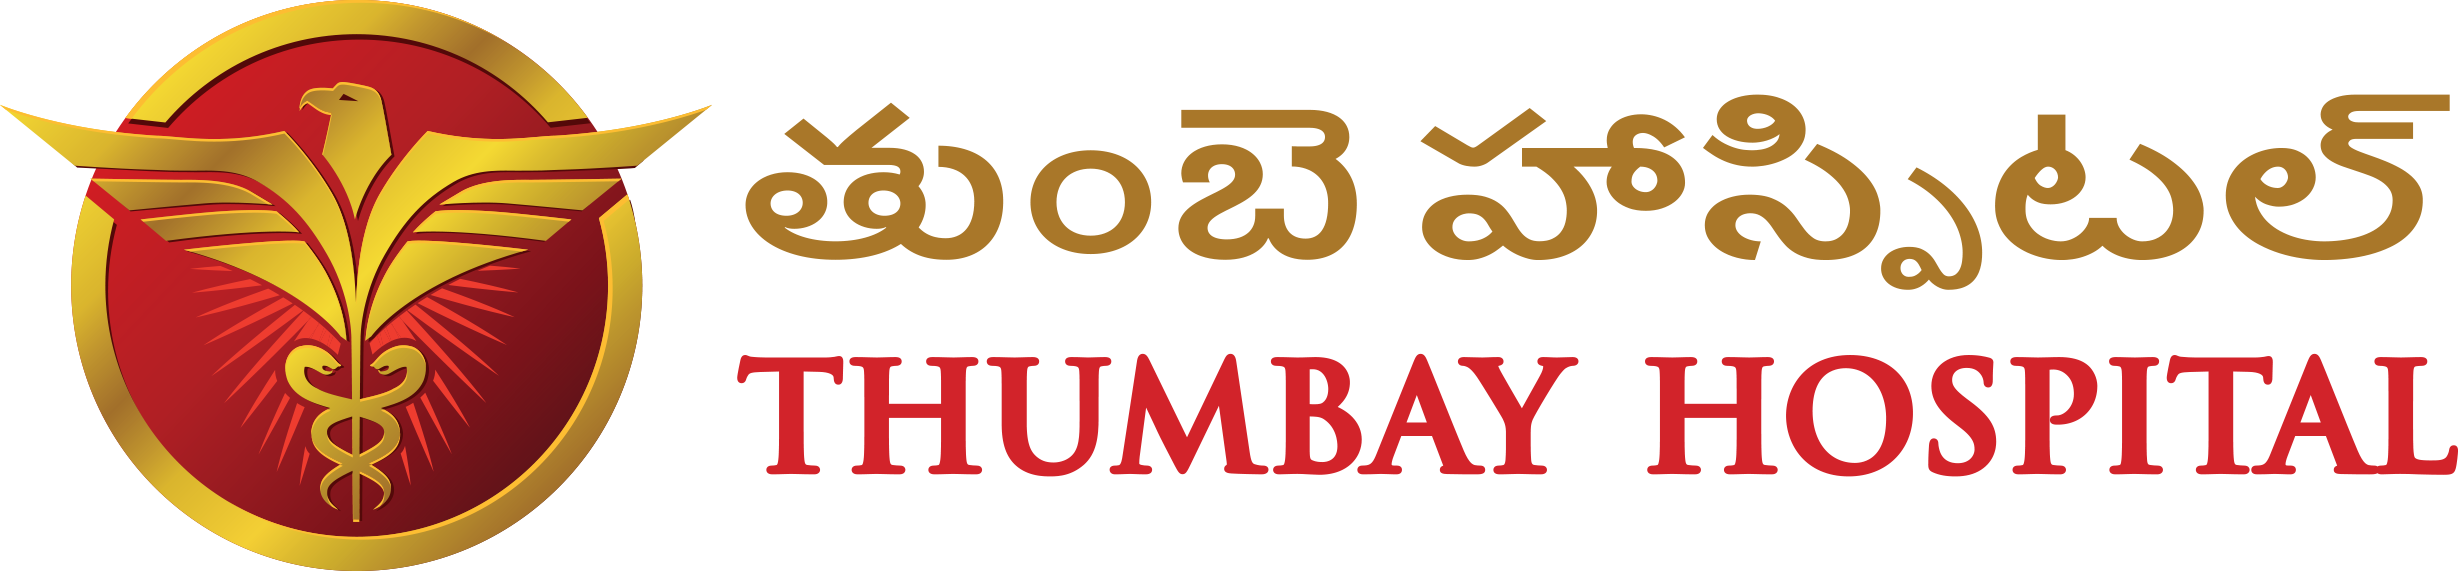 Thumbay Hospital|Healthcare|Medical Services